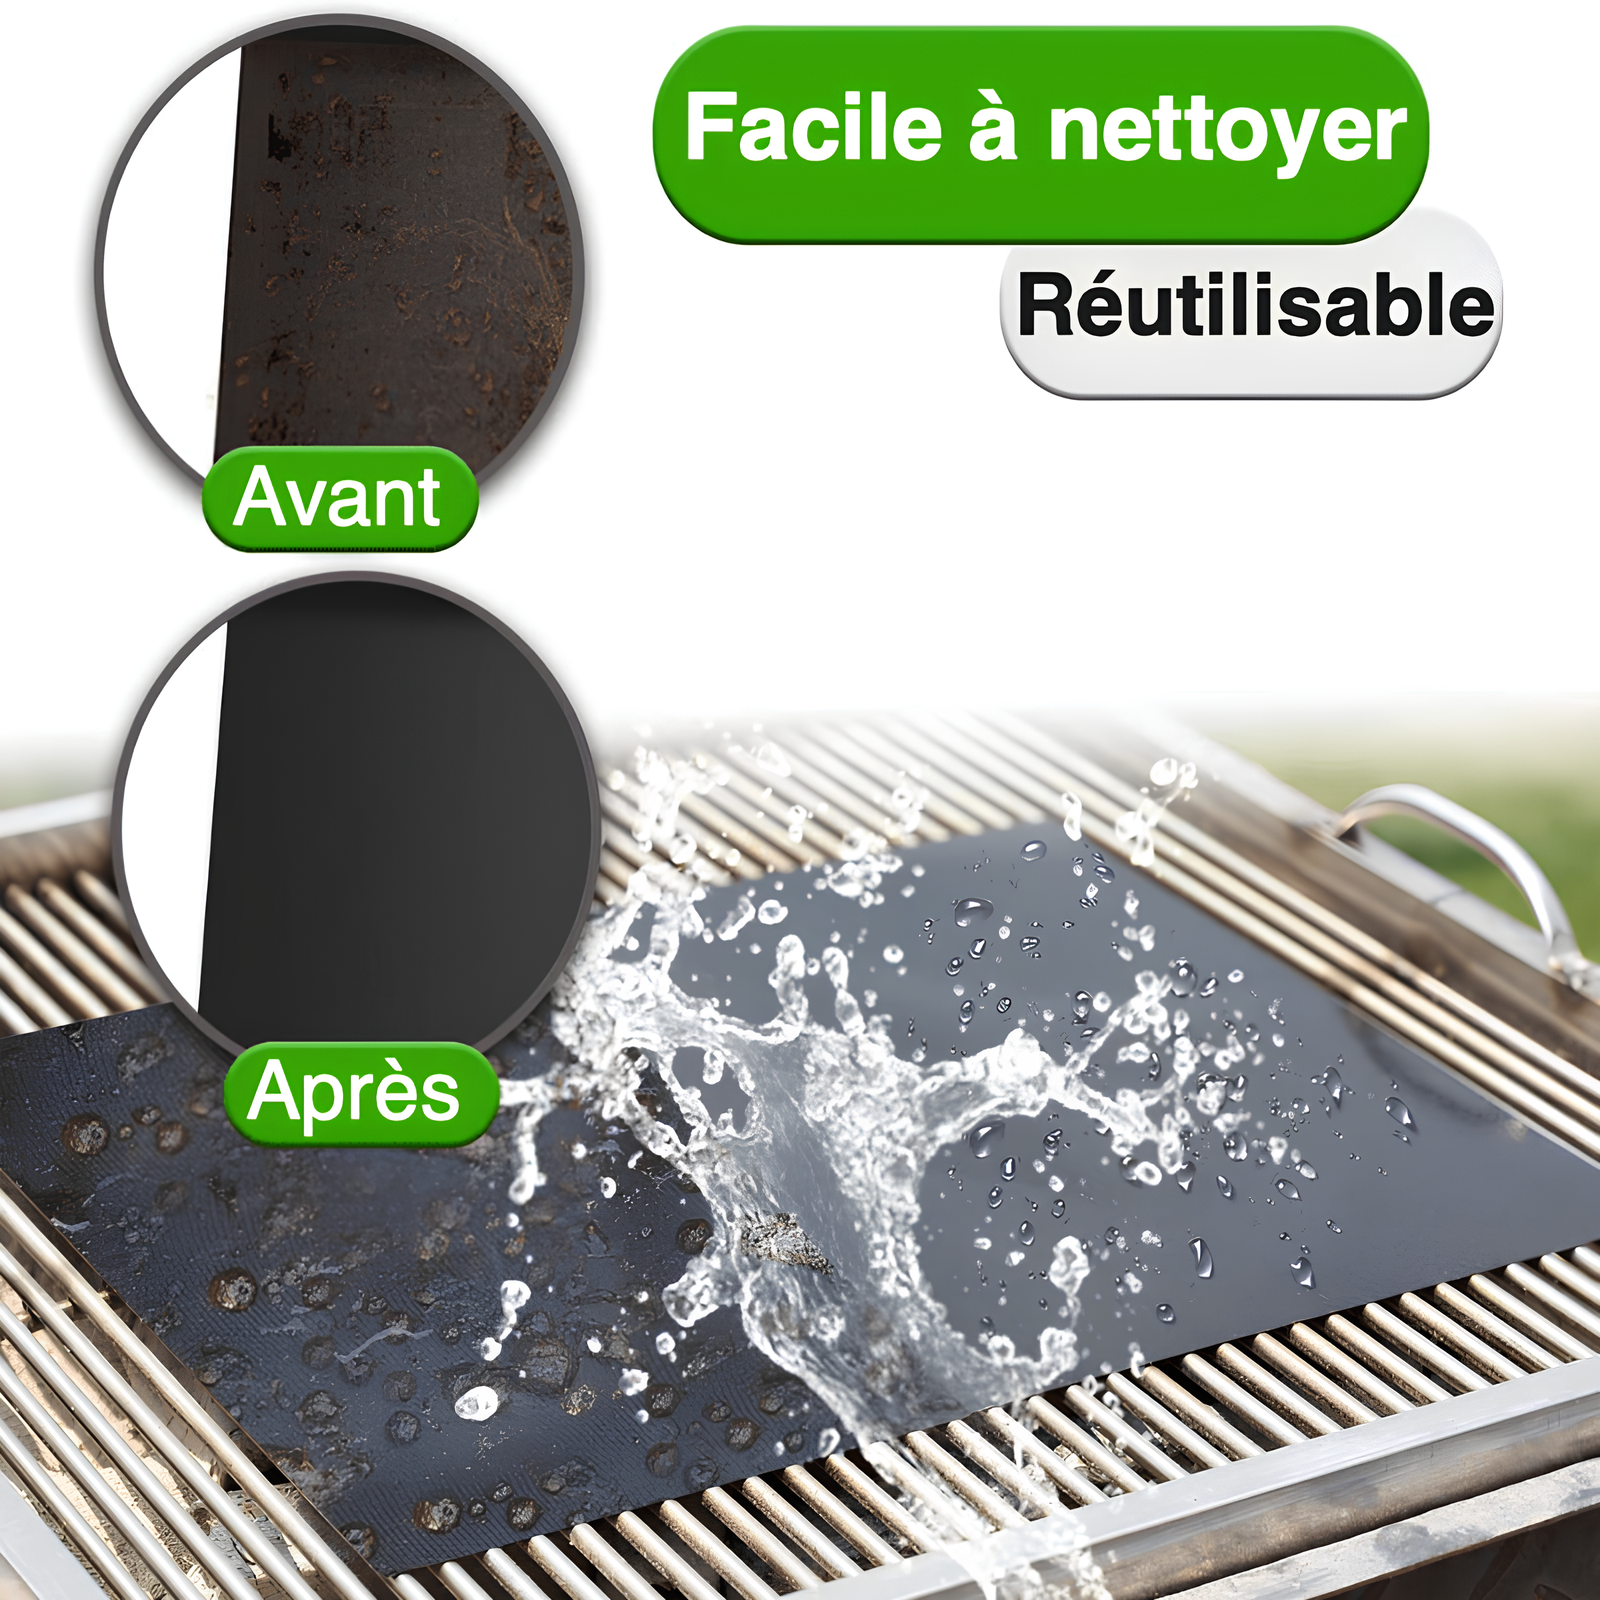 Tapis de cuisson spécial barbecue - UstensilesCulinaires